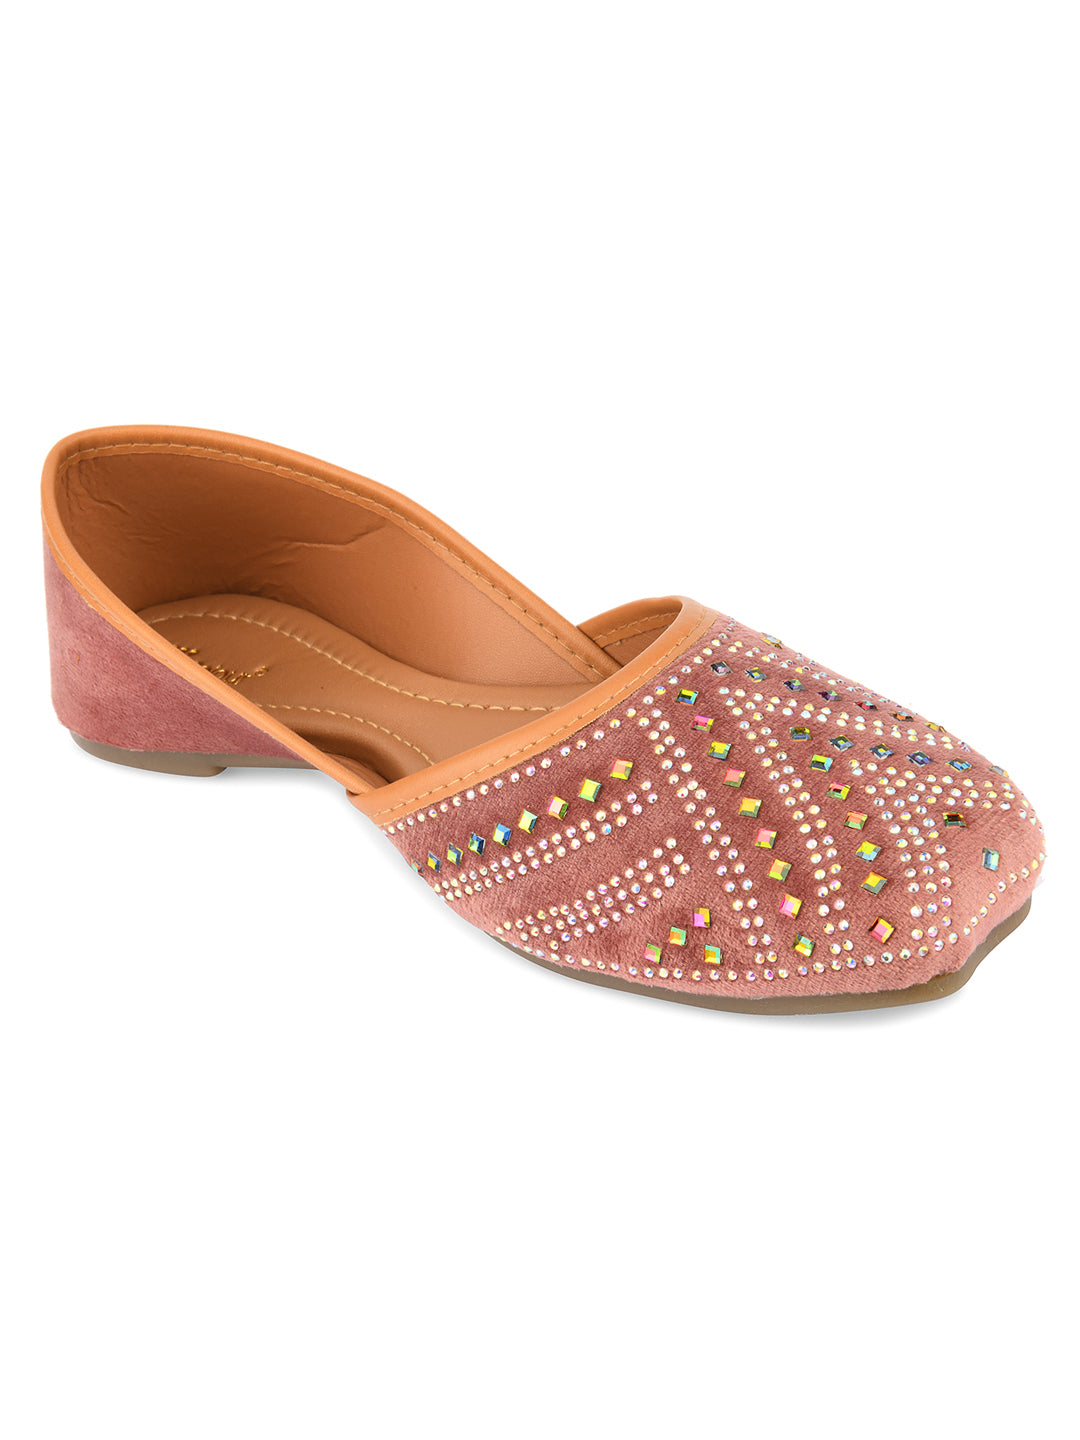 Women's Peach Handcrafted Stone Work  Indian Ethnic Comfort Footwear - Desi Colour